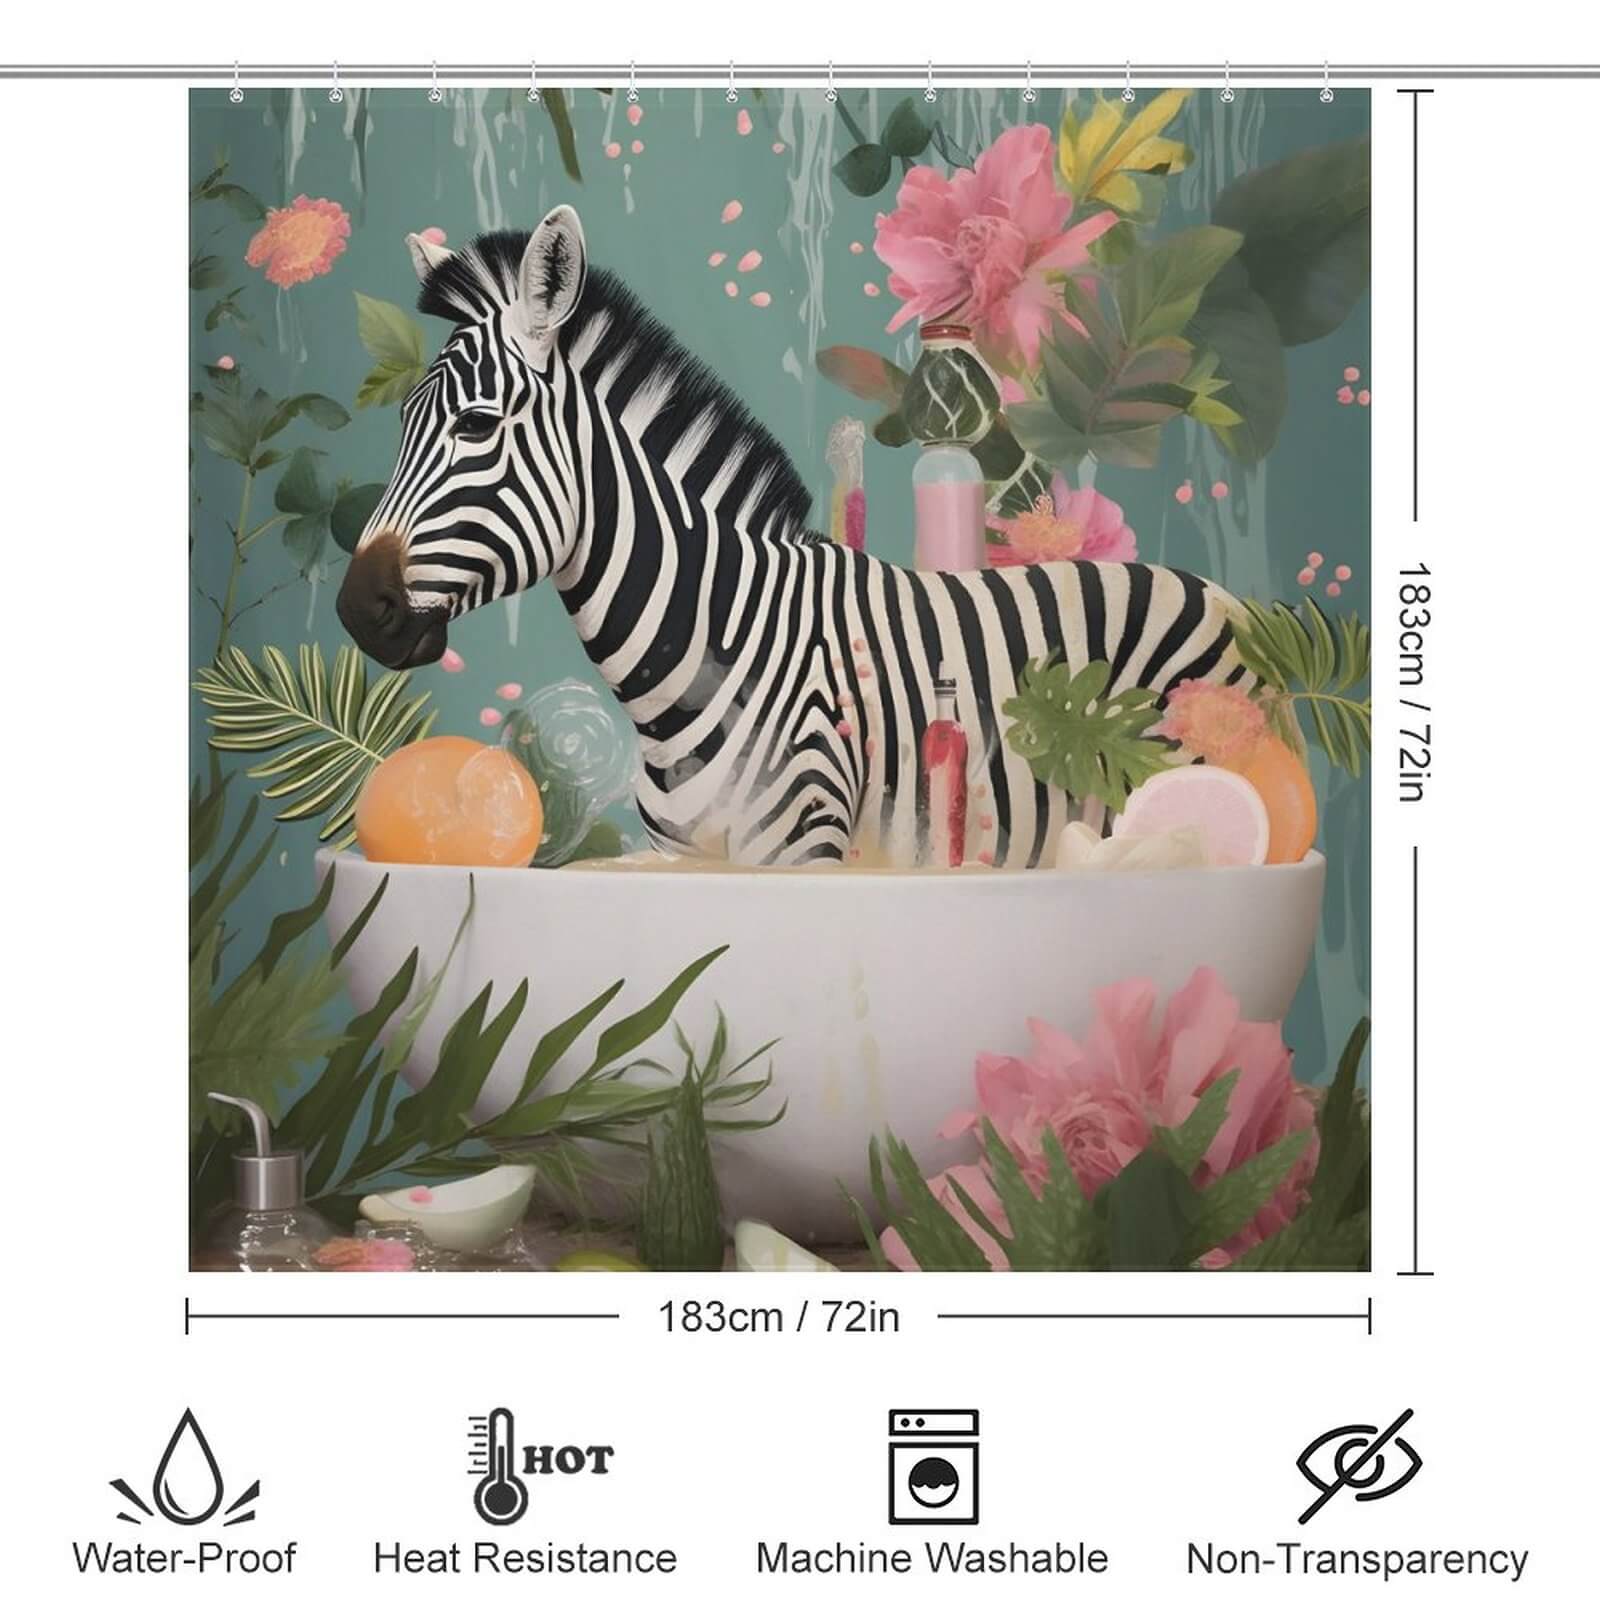 A waterproof Zebra In Bathtub Shower Curtain-Cottoncat featuring a safari-inspired design with flowers and plants.